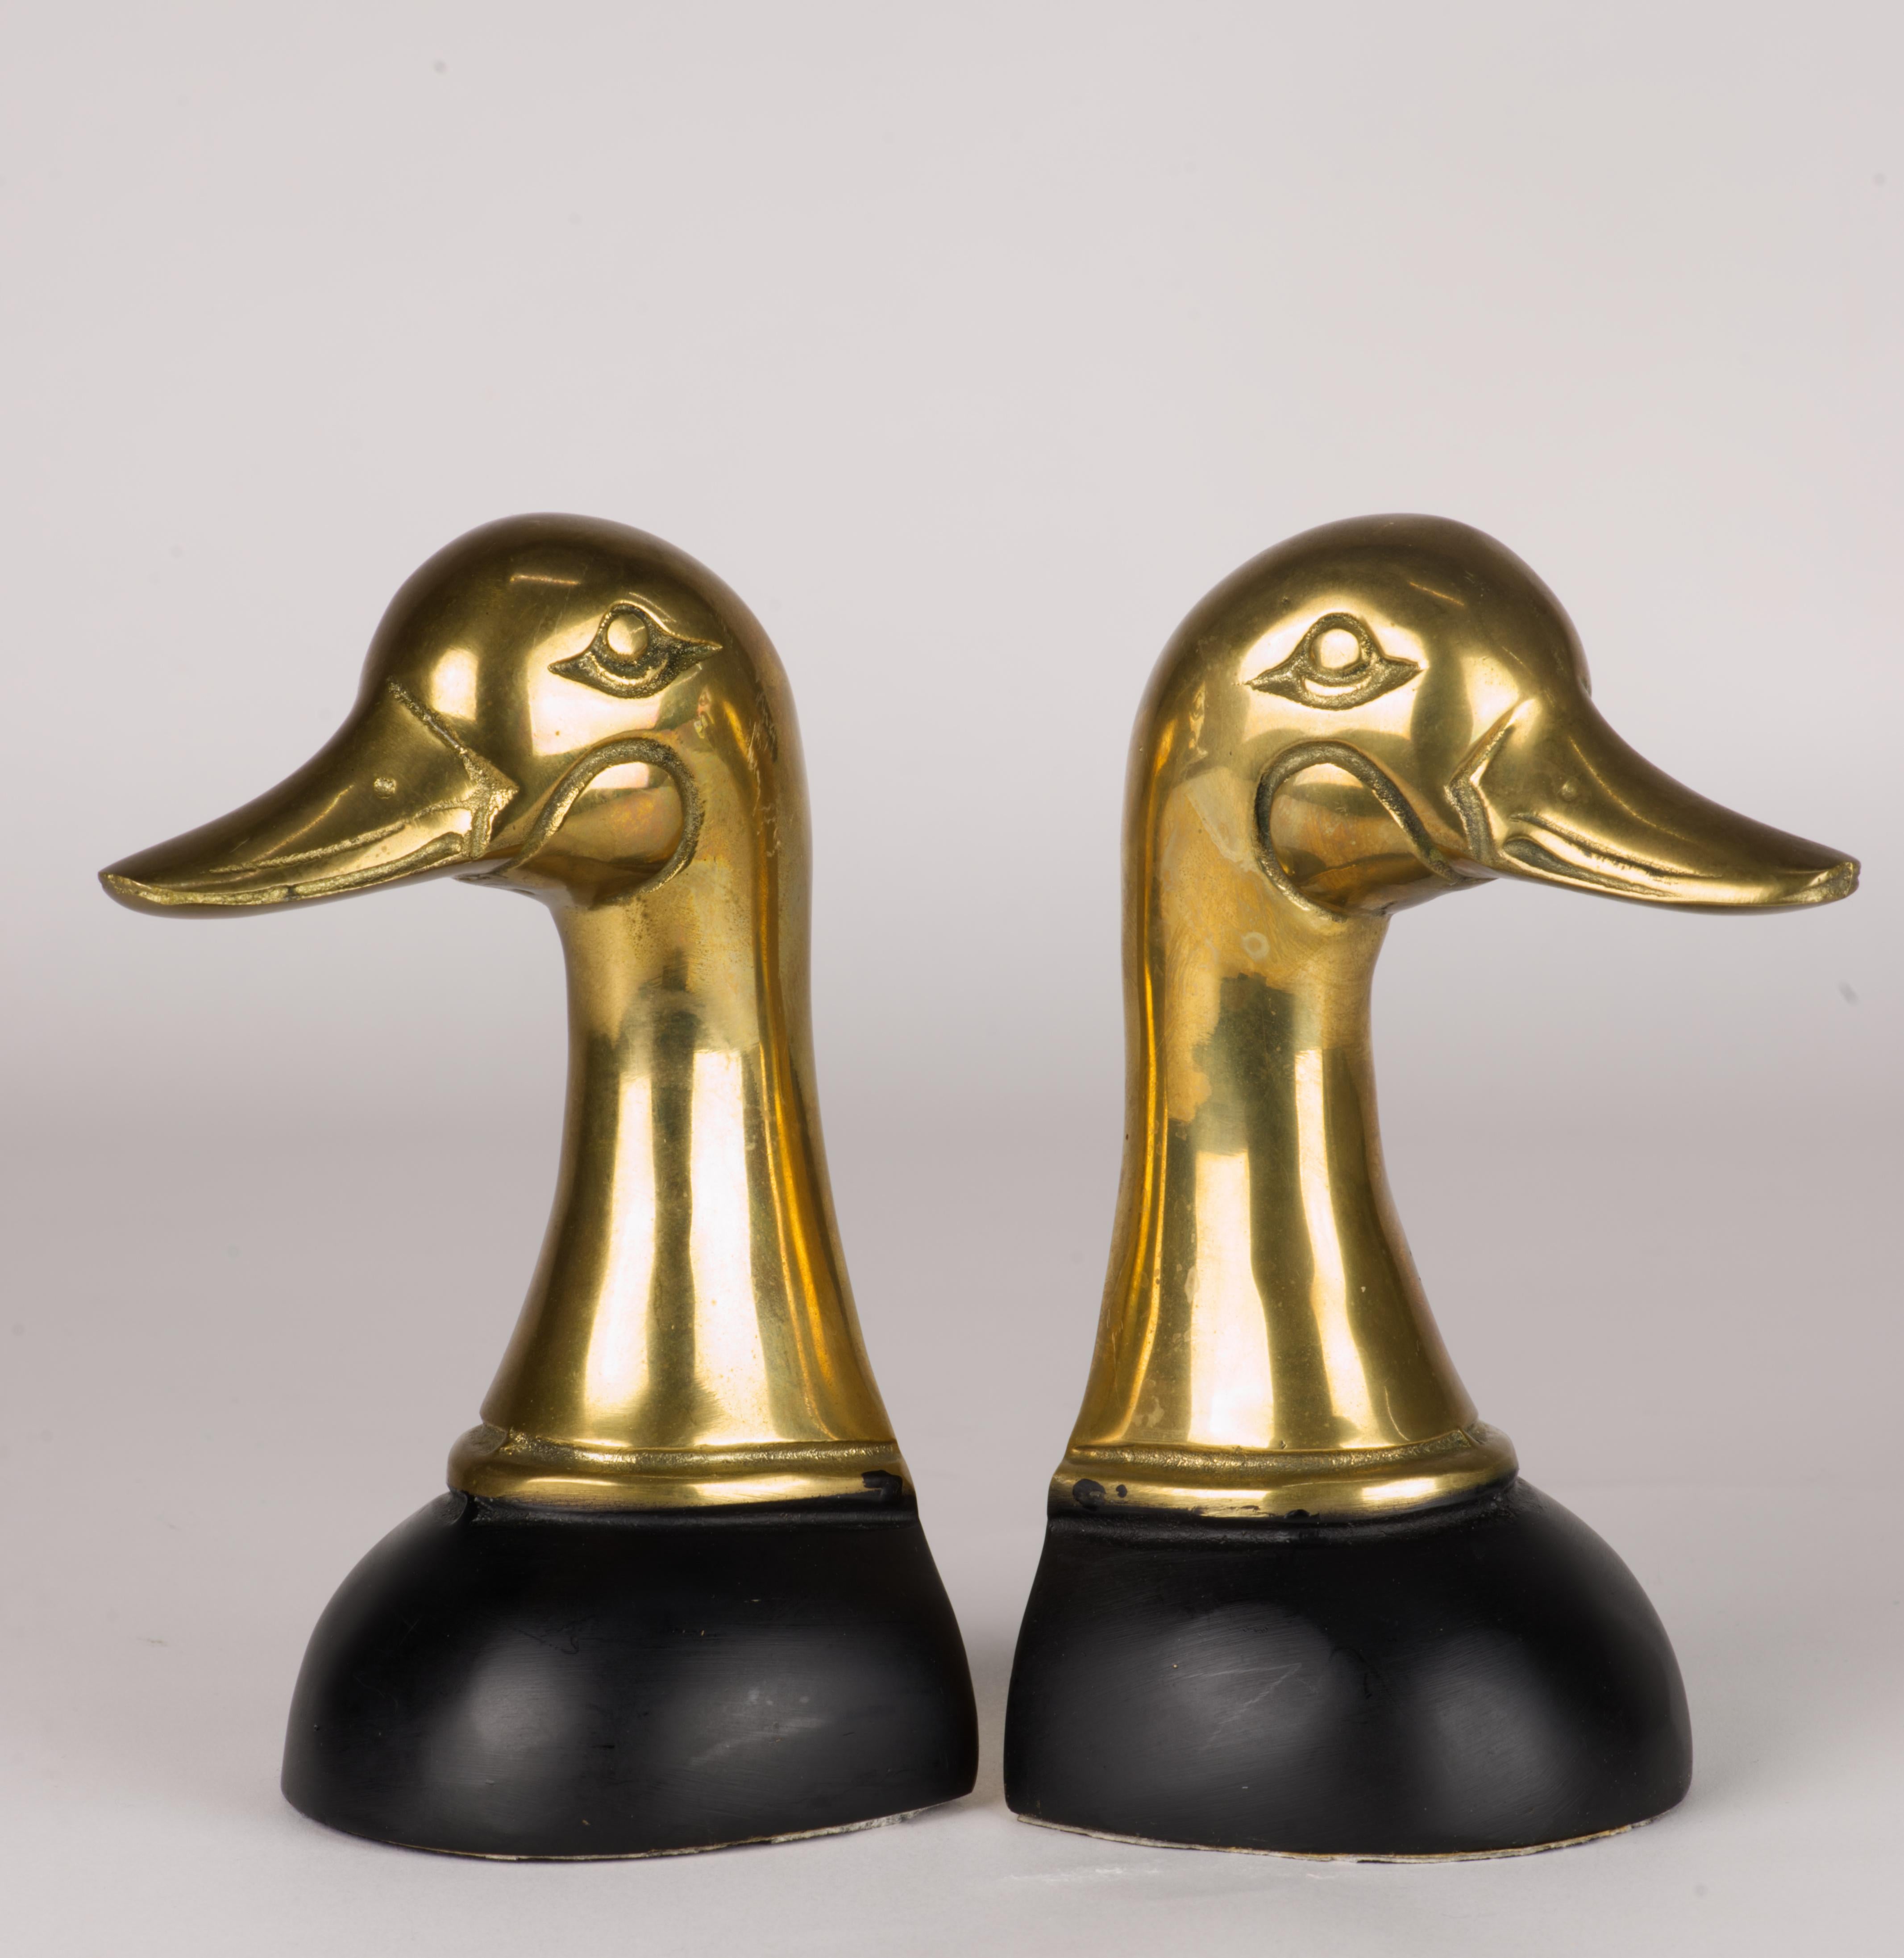  Vintage pair of Mallard duck bookends is made of polished cast brass with detailed eyes, cheeks and beaks. The wide bases curve gently down, providing extra stability to the heavy, substantial pieces; the bases are done in matte black finish on top